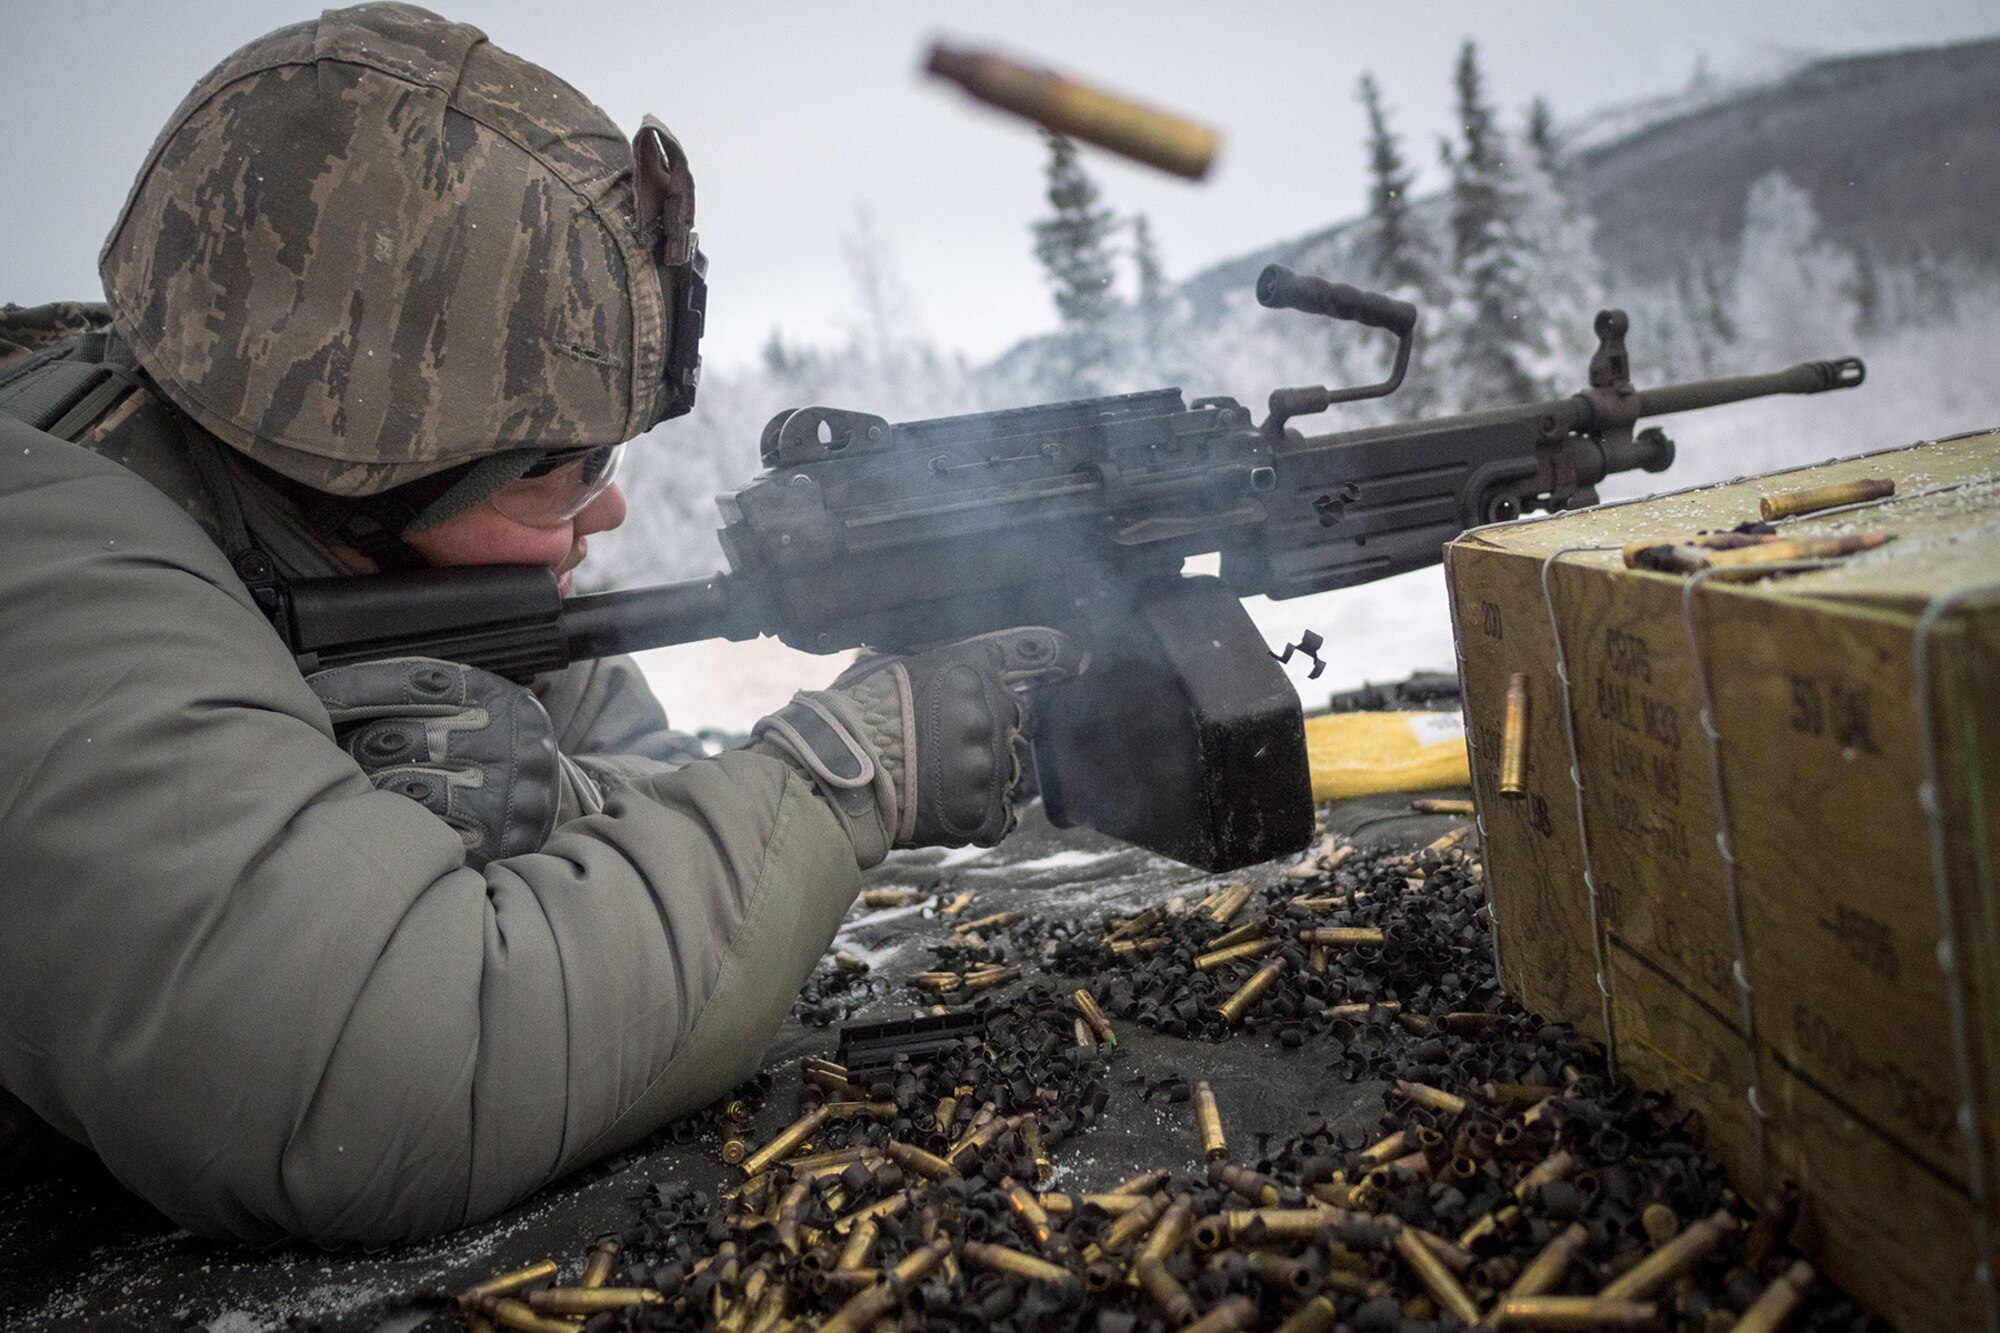 Senior Airman Tina-Louise Dunbar, a native of Anchorage, Alaska, assigned to the 673d Security Forces Squadron, fires on a target with an M249 Squad Automatic Weaponduring a machine gun qualification range on Joint Base Elmendorf-Richardson, Alaska, Jan. 10, 2018. Security Forces Airmen perform extensive training in law enforcement as well as combat tactics to protect U.S. Military bases and assets both stateside and overseas.